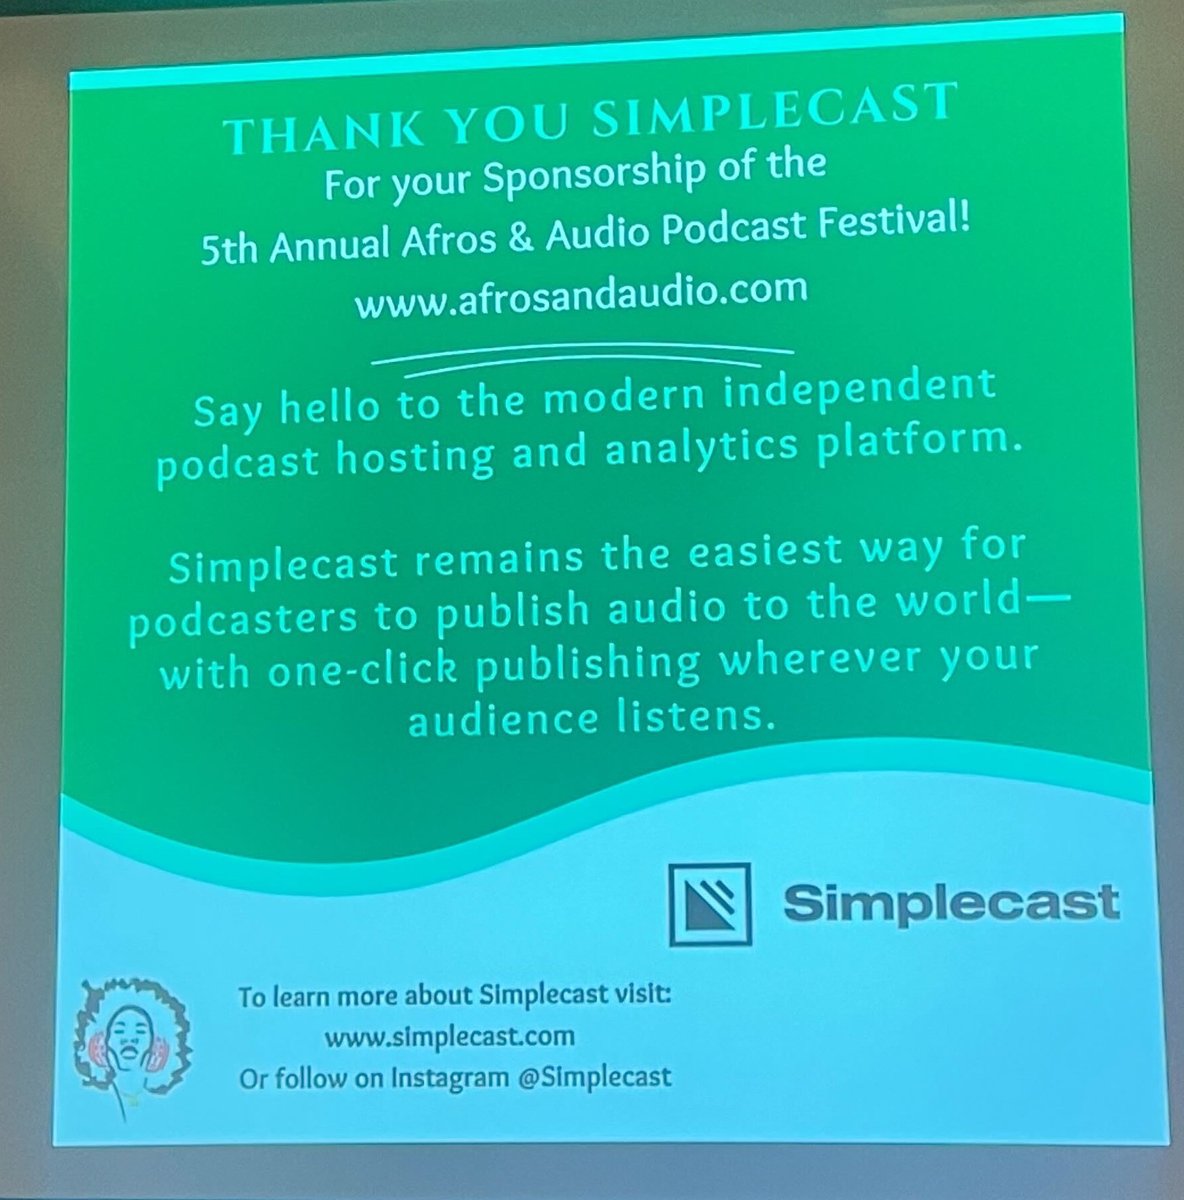 A sponsorship thank-you slide for Simplecast: "Thank you Simplecast for your sponsorship of the 5th Annual Afros & Audio Podcast Festival! Say hello to the modern independent podcast hosting and analytics platform. Simplecast remains the easiest way for podcasters to publish audio to the world -- with one-click publishing wherever your audience listens. To learn more about Simplecast visit: www.simplecast.com or follow on Instagram @ Simplecast."